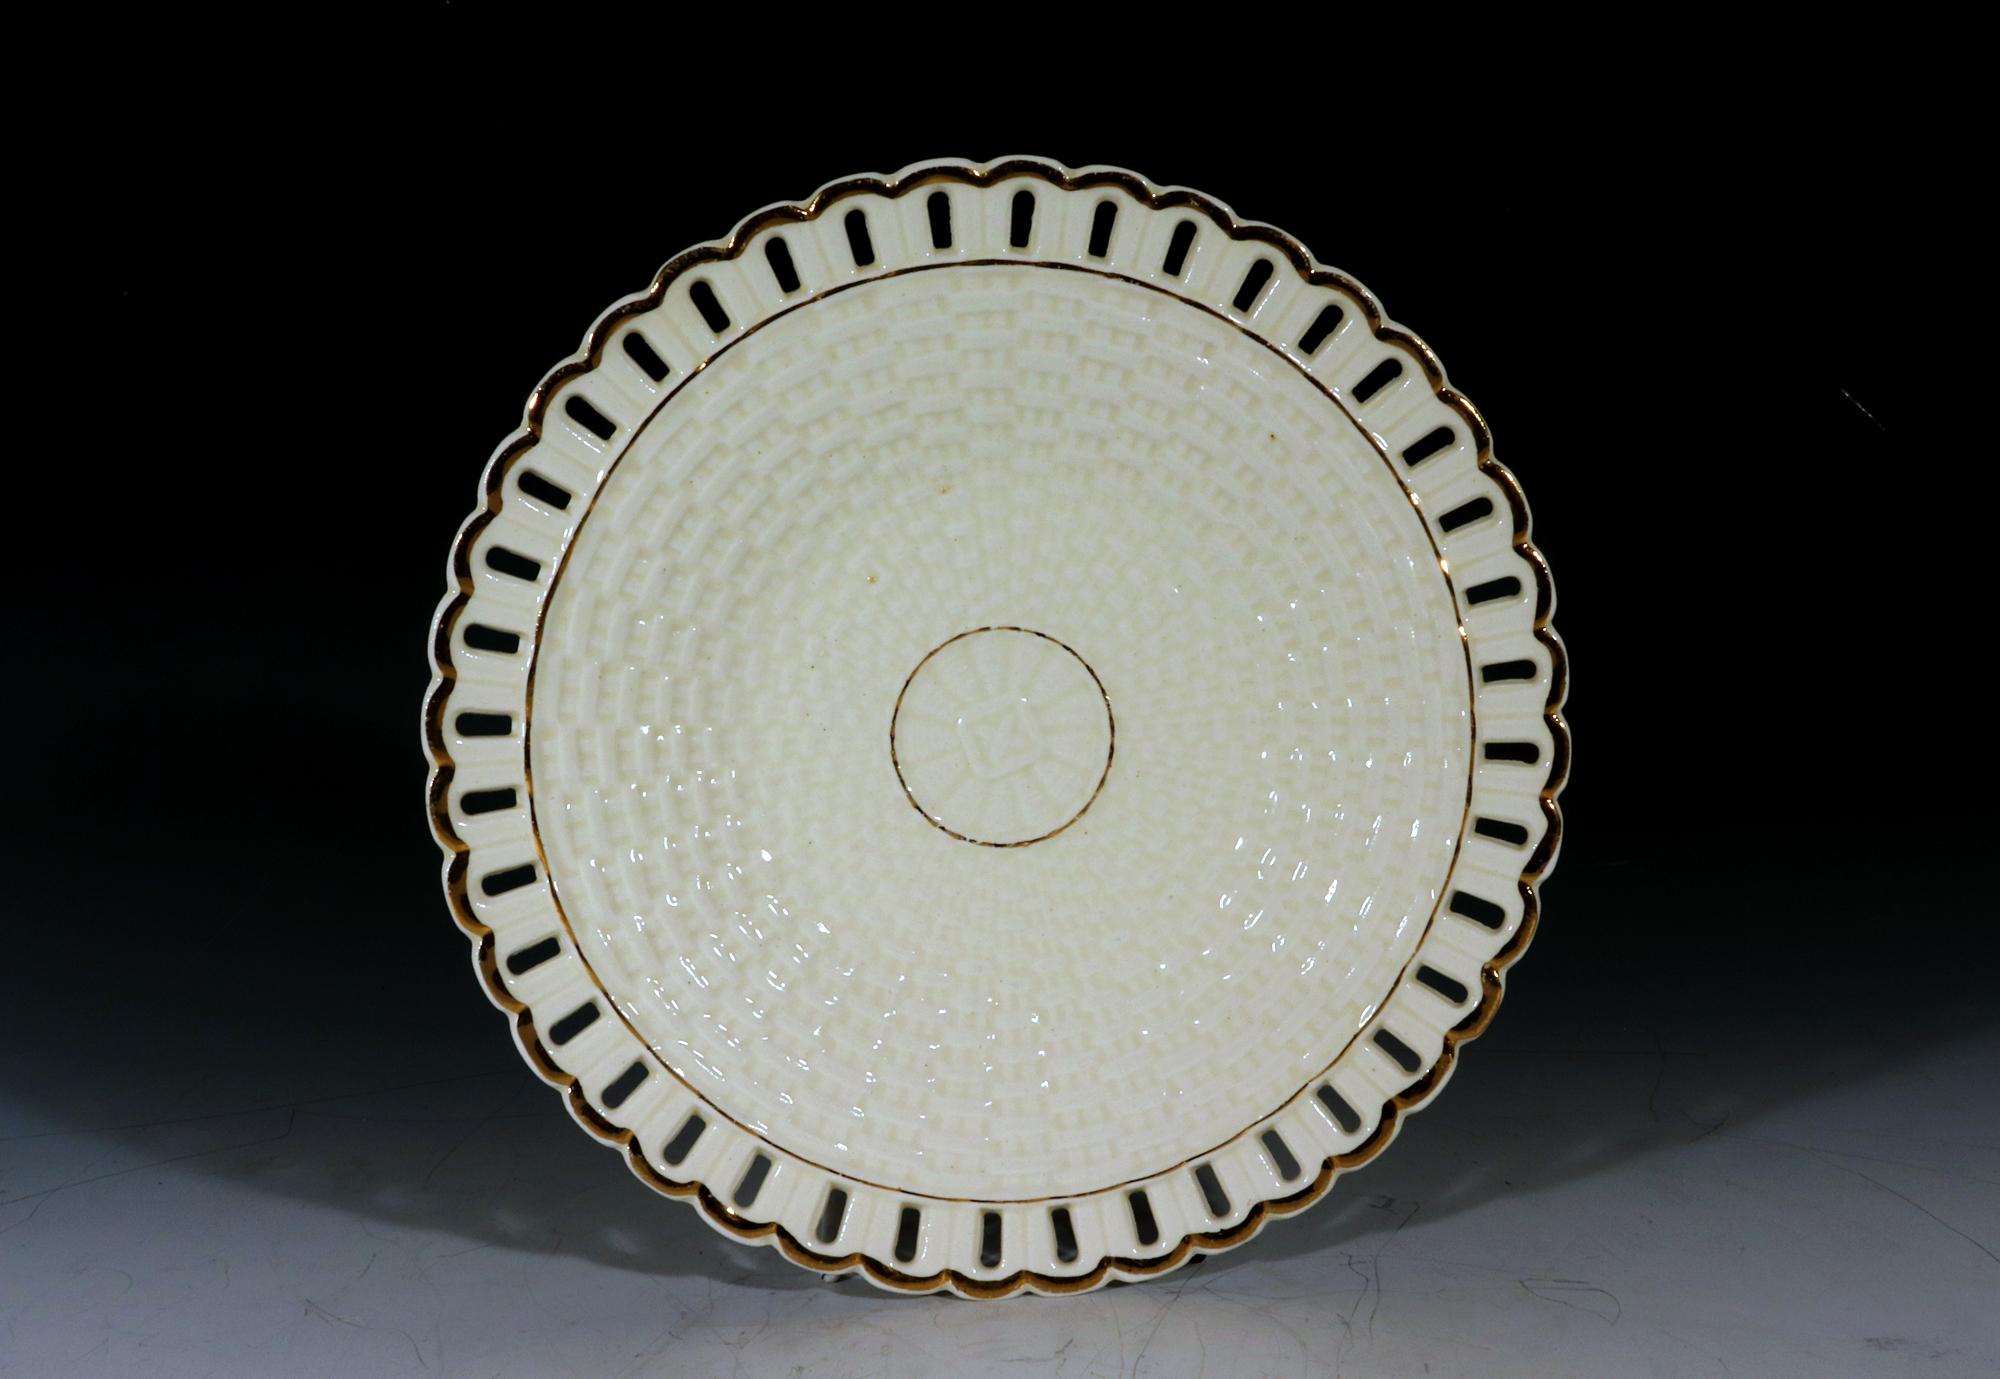 Set of Seven Continental Creamware Openwork Dessert Plates

The basketweave creamware plates have an openwork reeded border with a gilt rim. The basketweave becomes tighter as it reaches the central roundel with a different weave